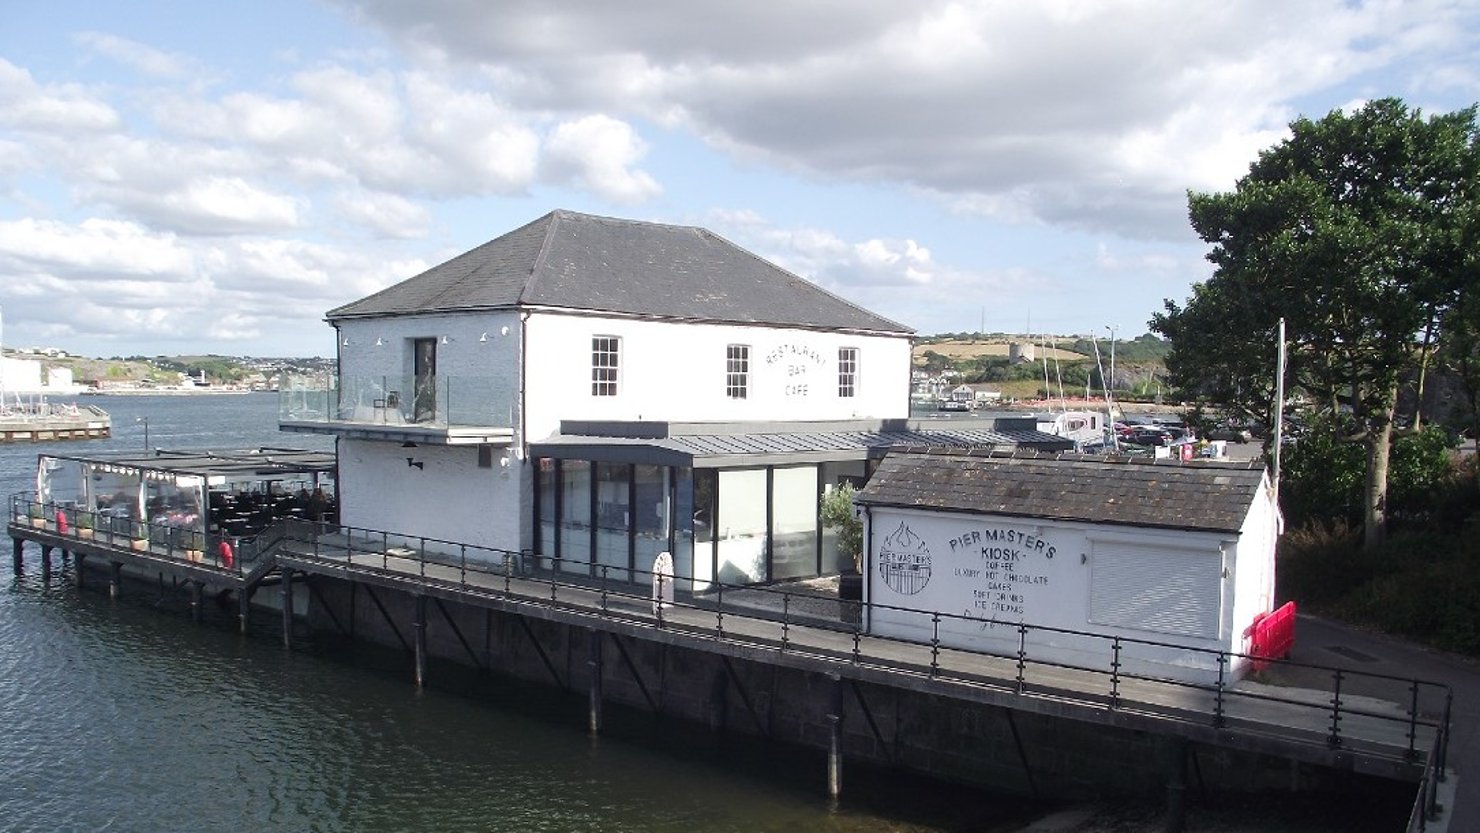 Pier Masters House in Plymouth. Image by Alan Barclay.